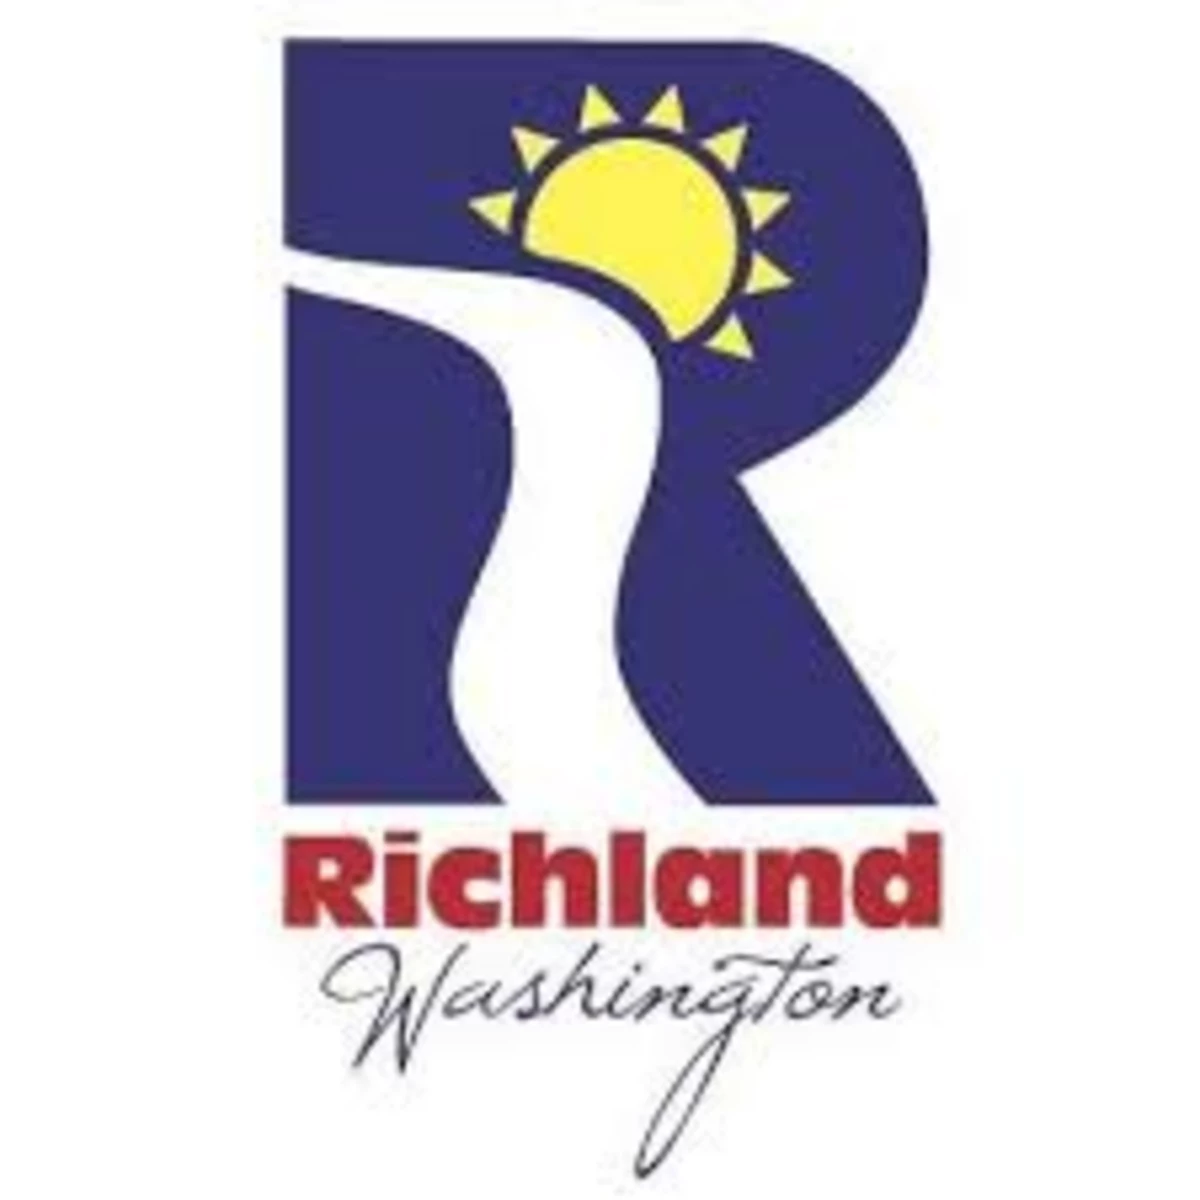 opportunity-knocks-a-free-energy-audit-event-for-richland-businesses